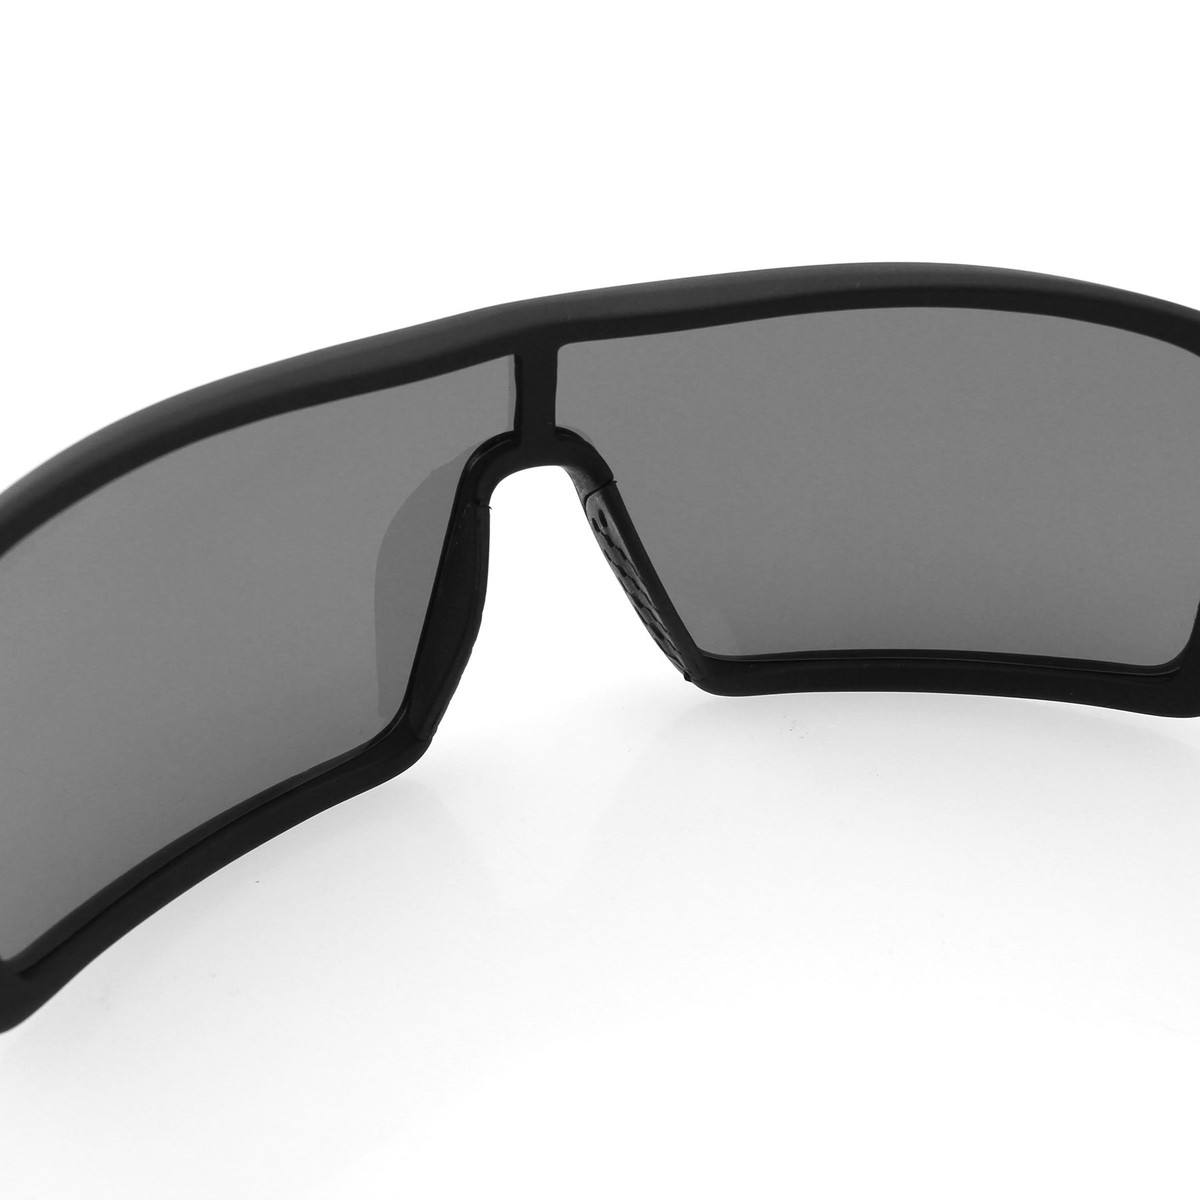 Bobster Paragon Matte Black Frame With Smoked Lenses sunglasses